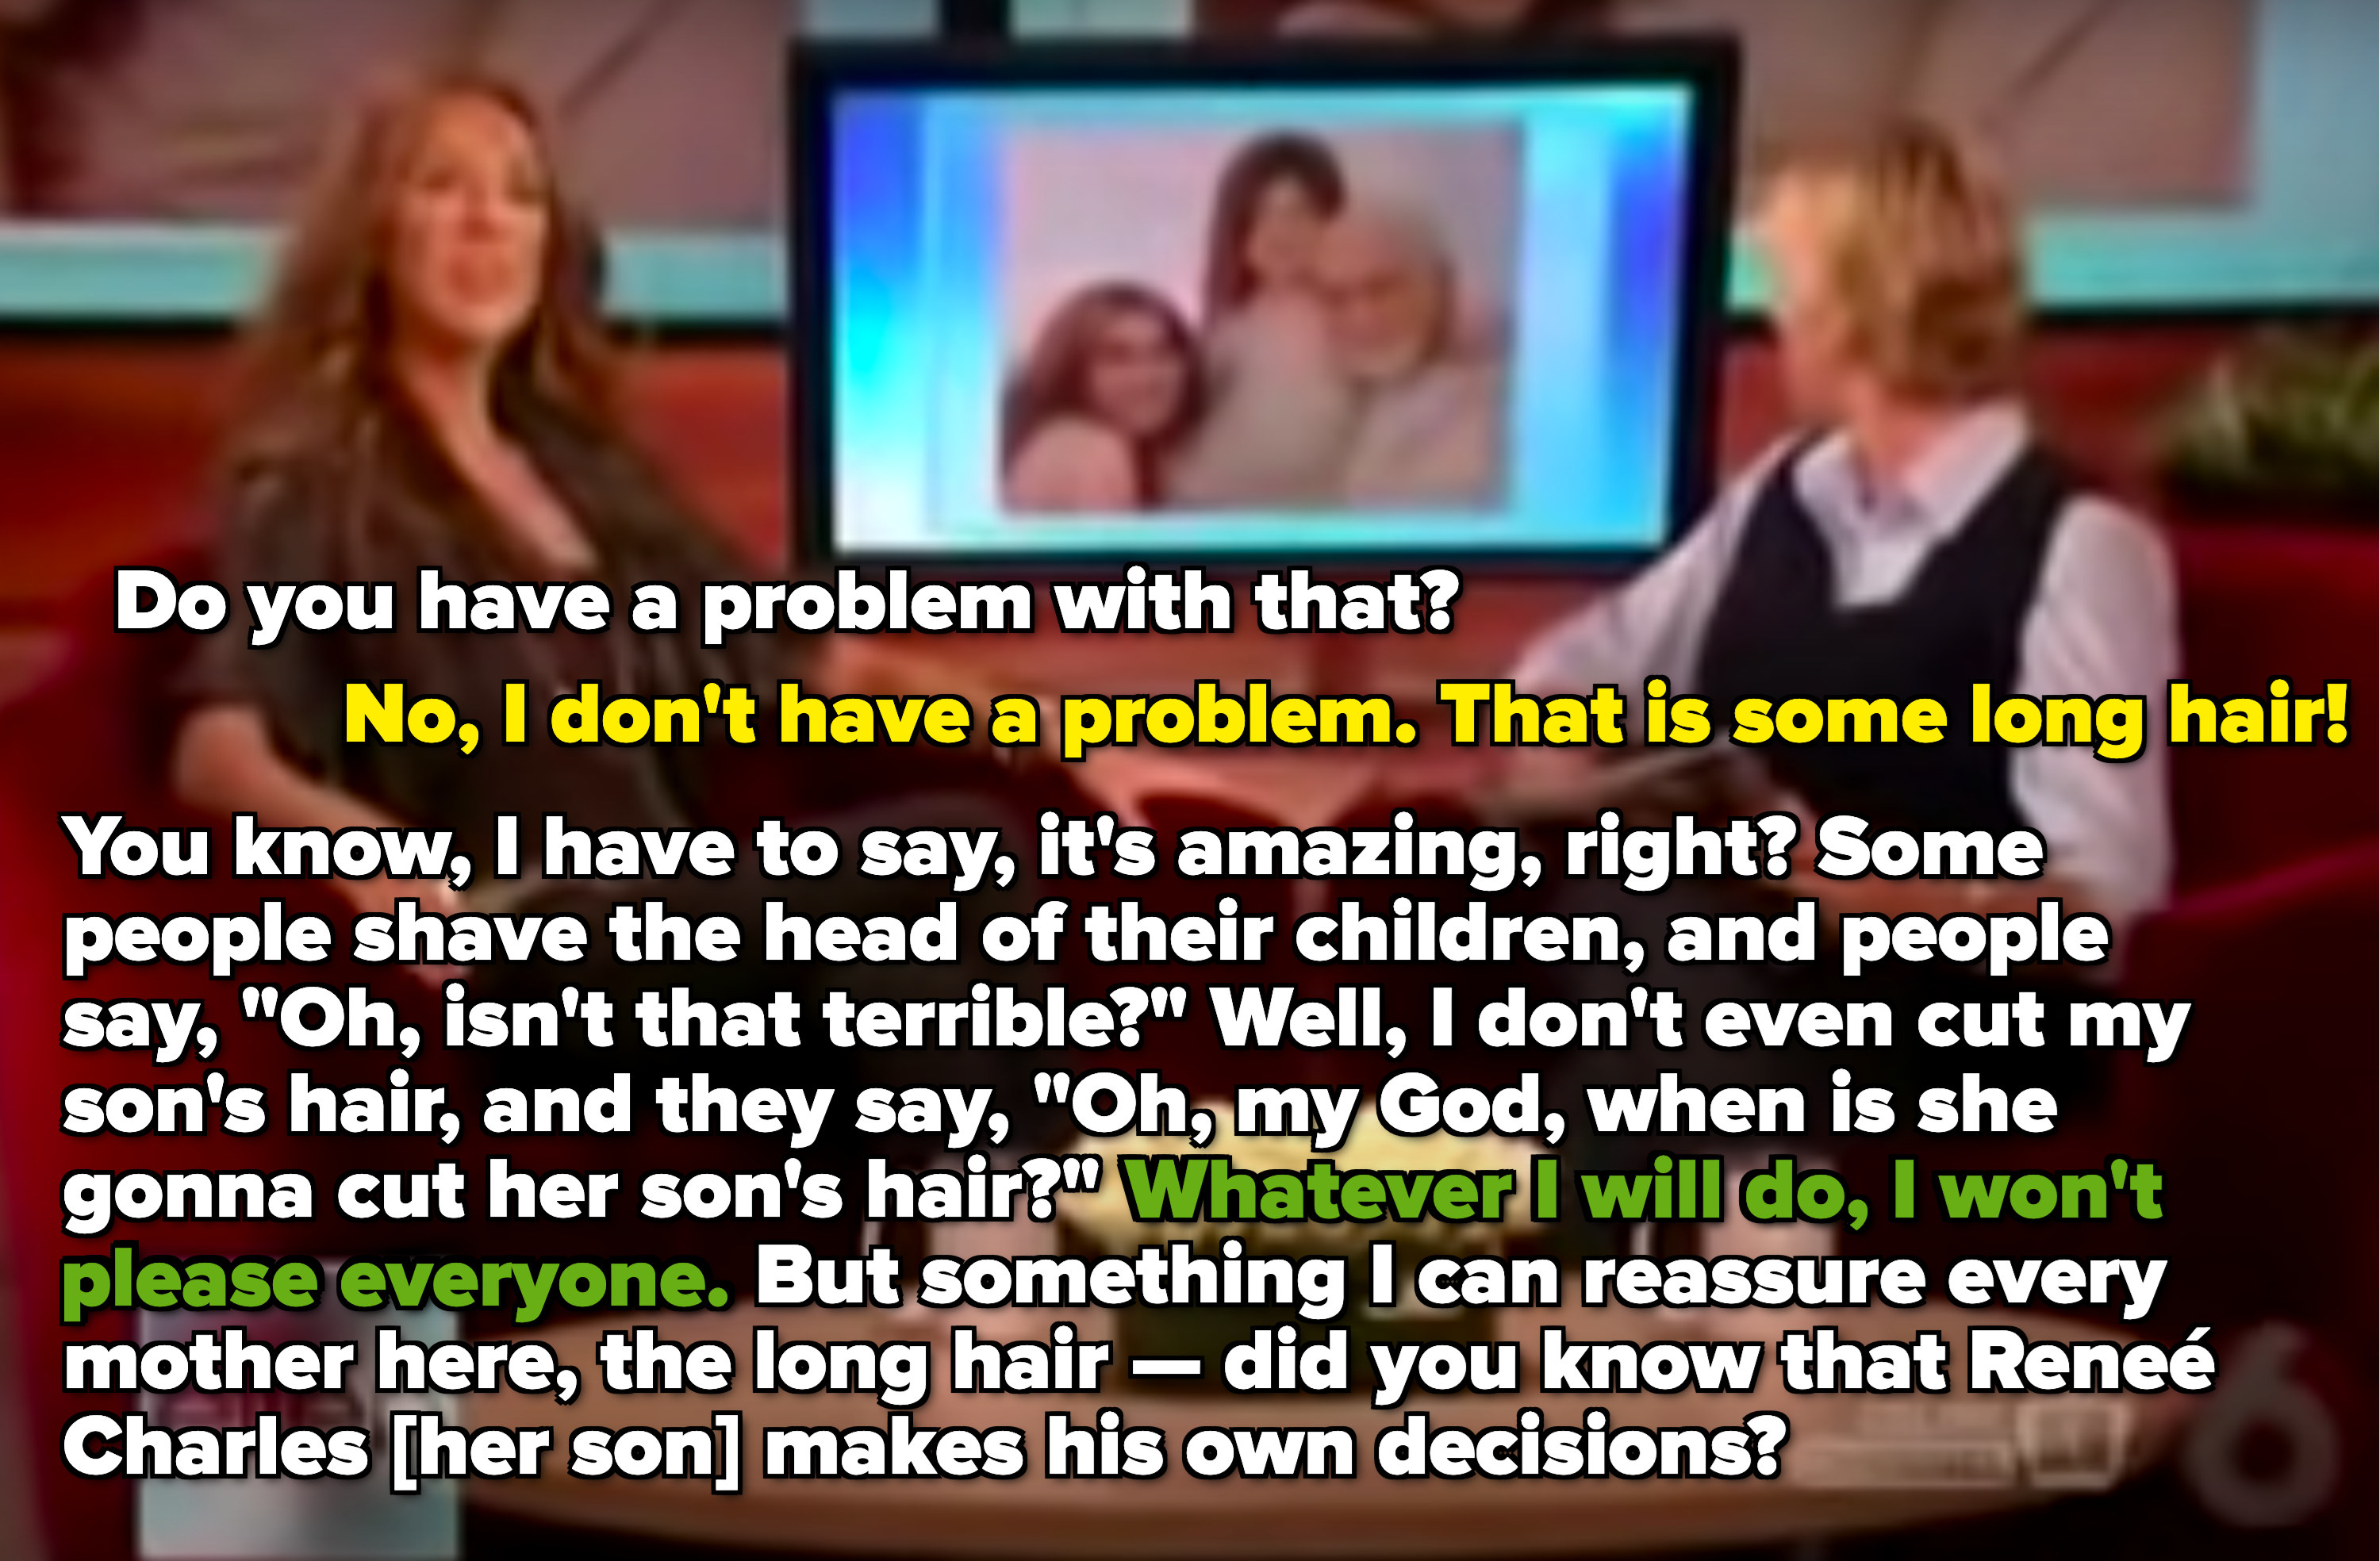 Celine saying no matter what she does, people will criticize her, but that her son makes his own decisions